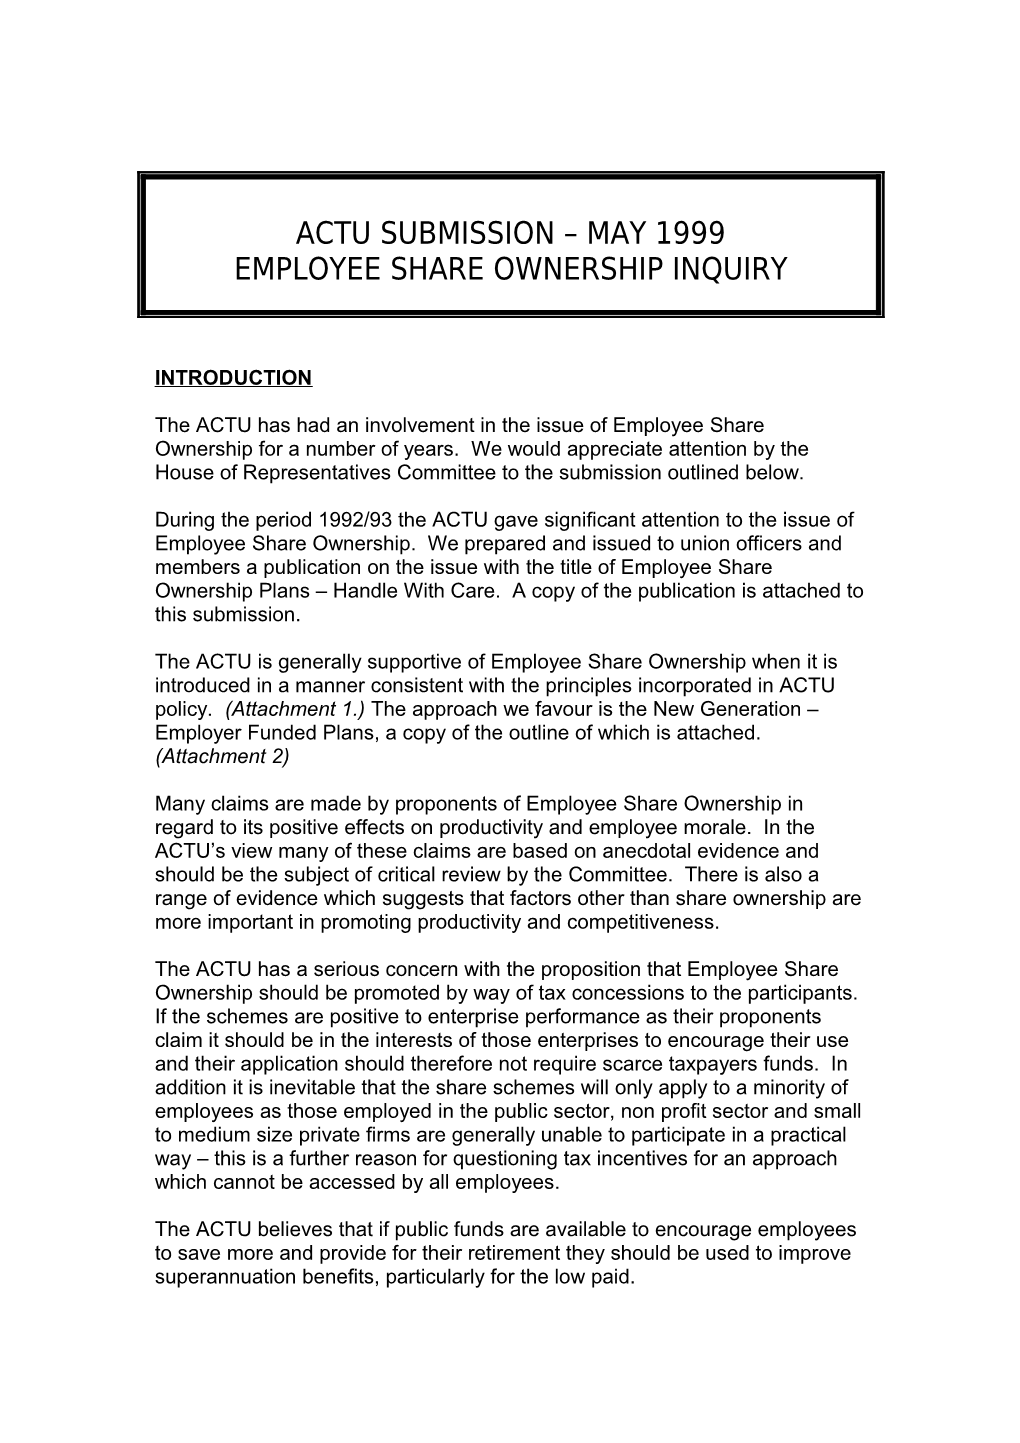 ACTU Submission - May 1999 Employee Share Ownership Inquiry